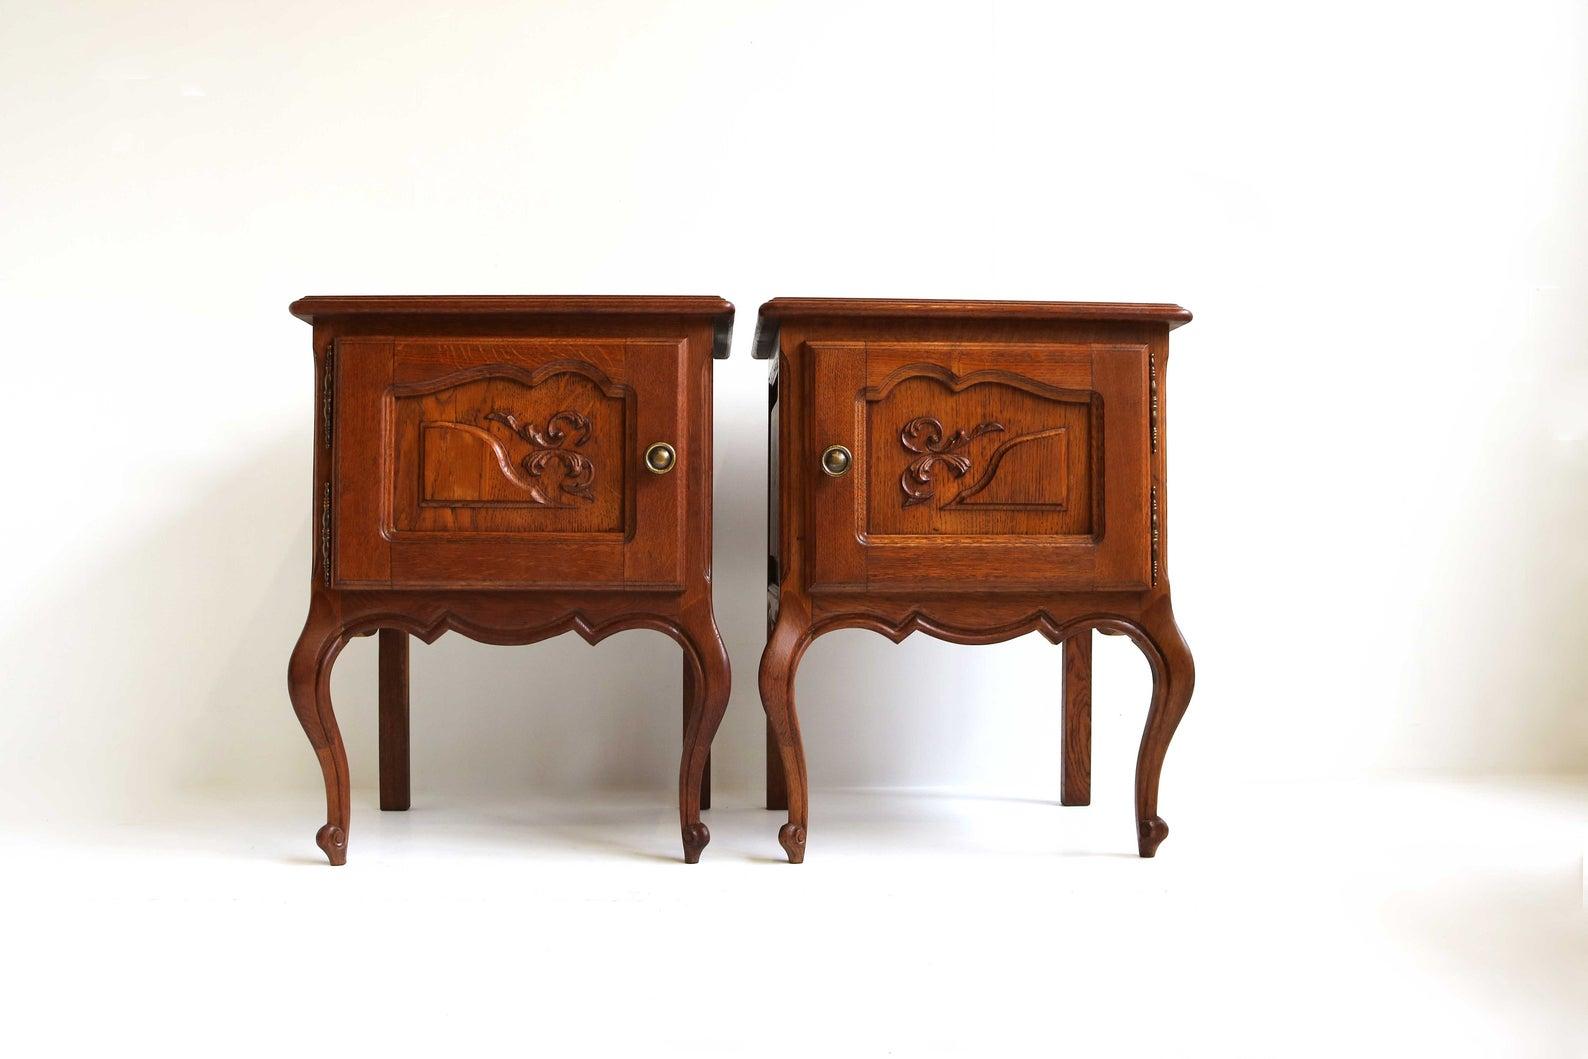 Oak couple / pair of midcentury wooden French Louis XV style doors night stands bedside table end tables side tables 1960

Two beautiful oak bedside tables!
Classic these 1960 French Louis XV style nightstands.
With decorative hand carved